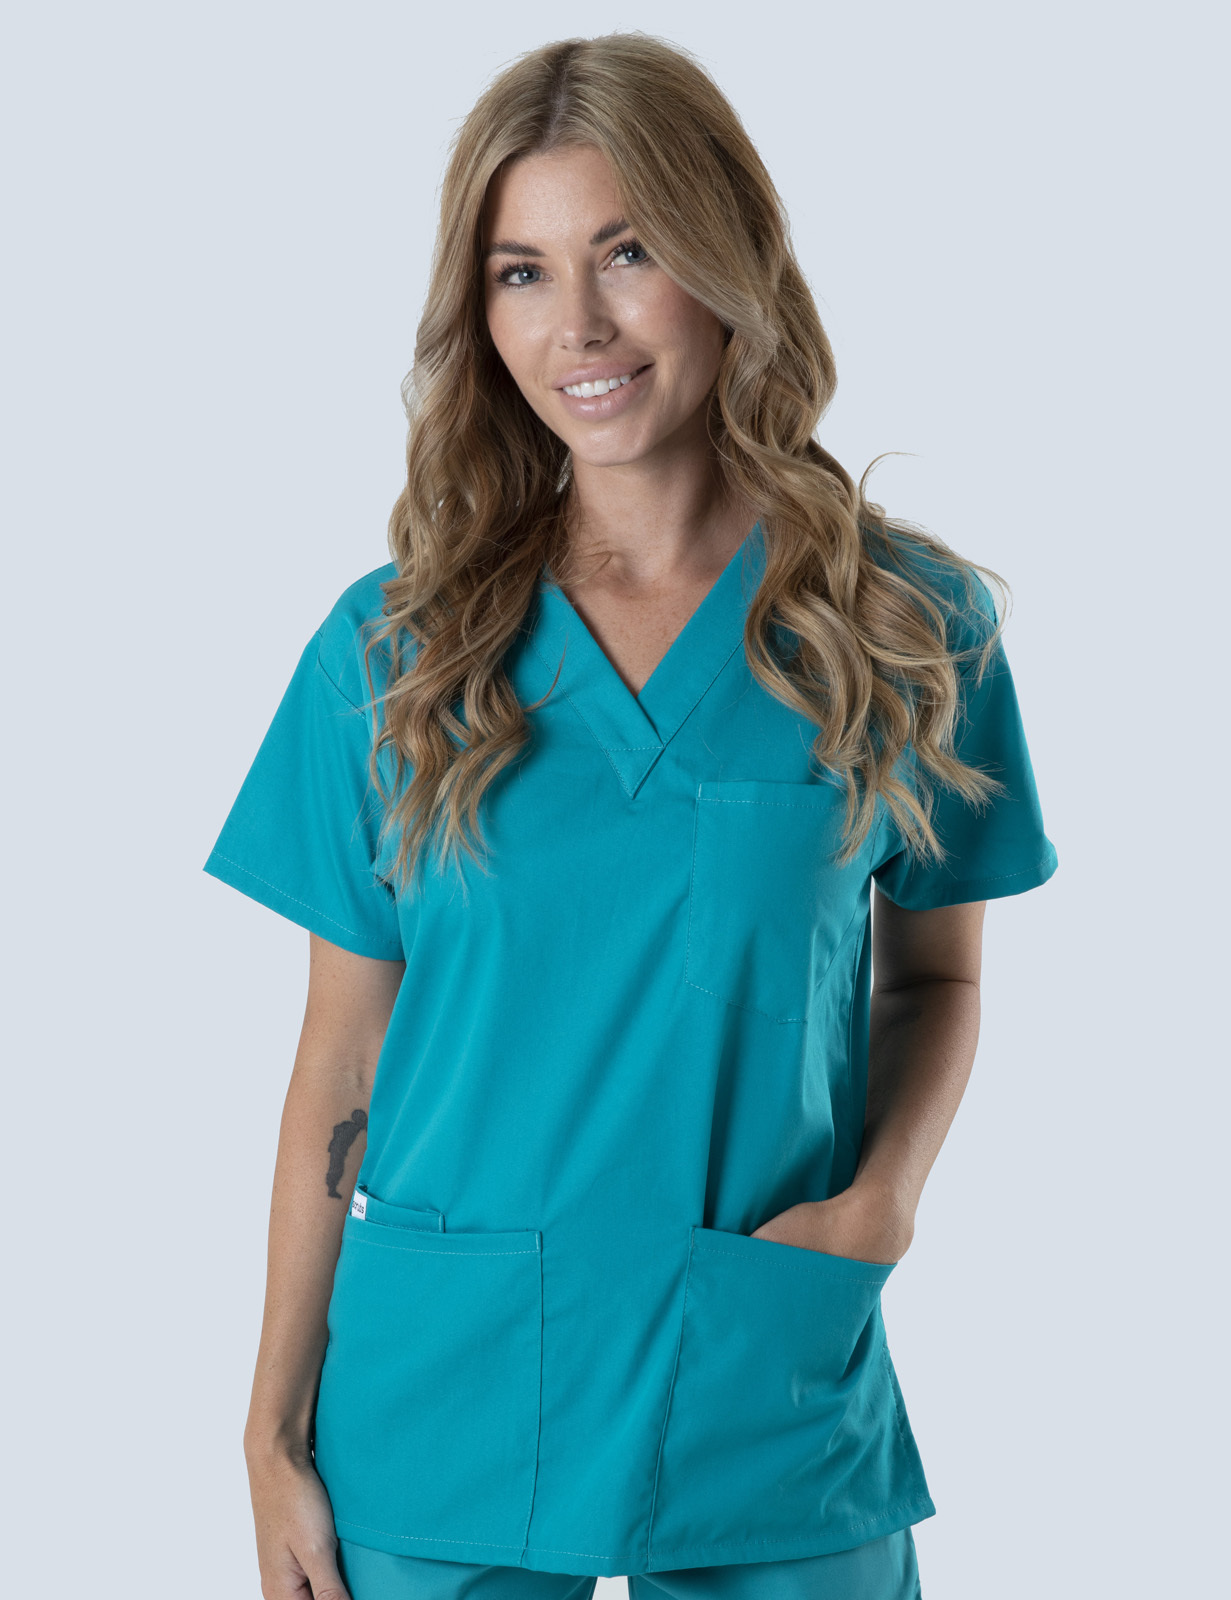 Gold Coast University Hospital - Midwife (4 Pocket Scrub Top and Cargo Pants in Navy incl Logos)